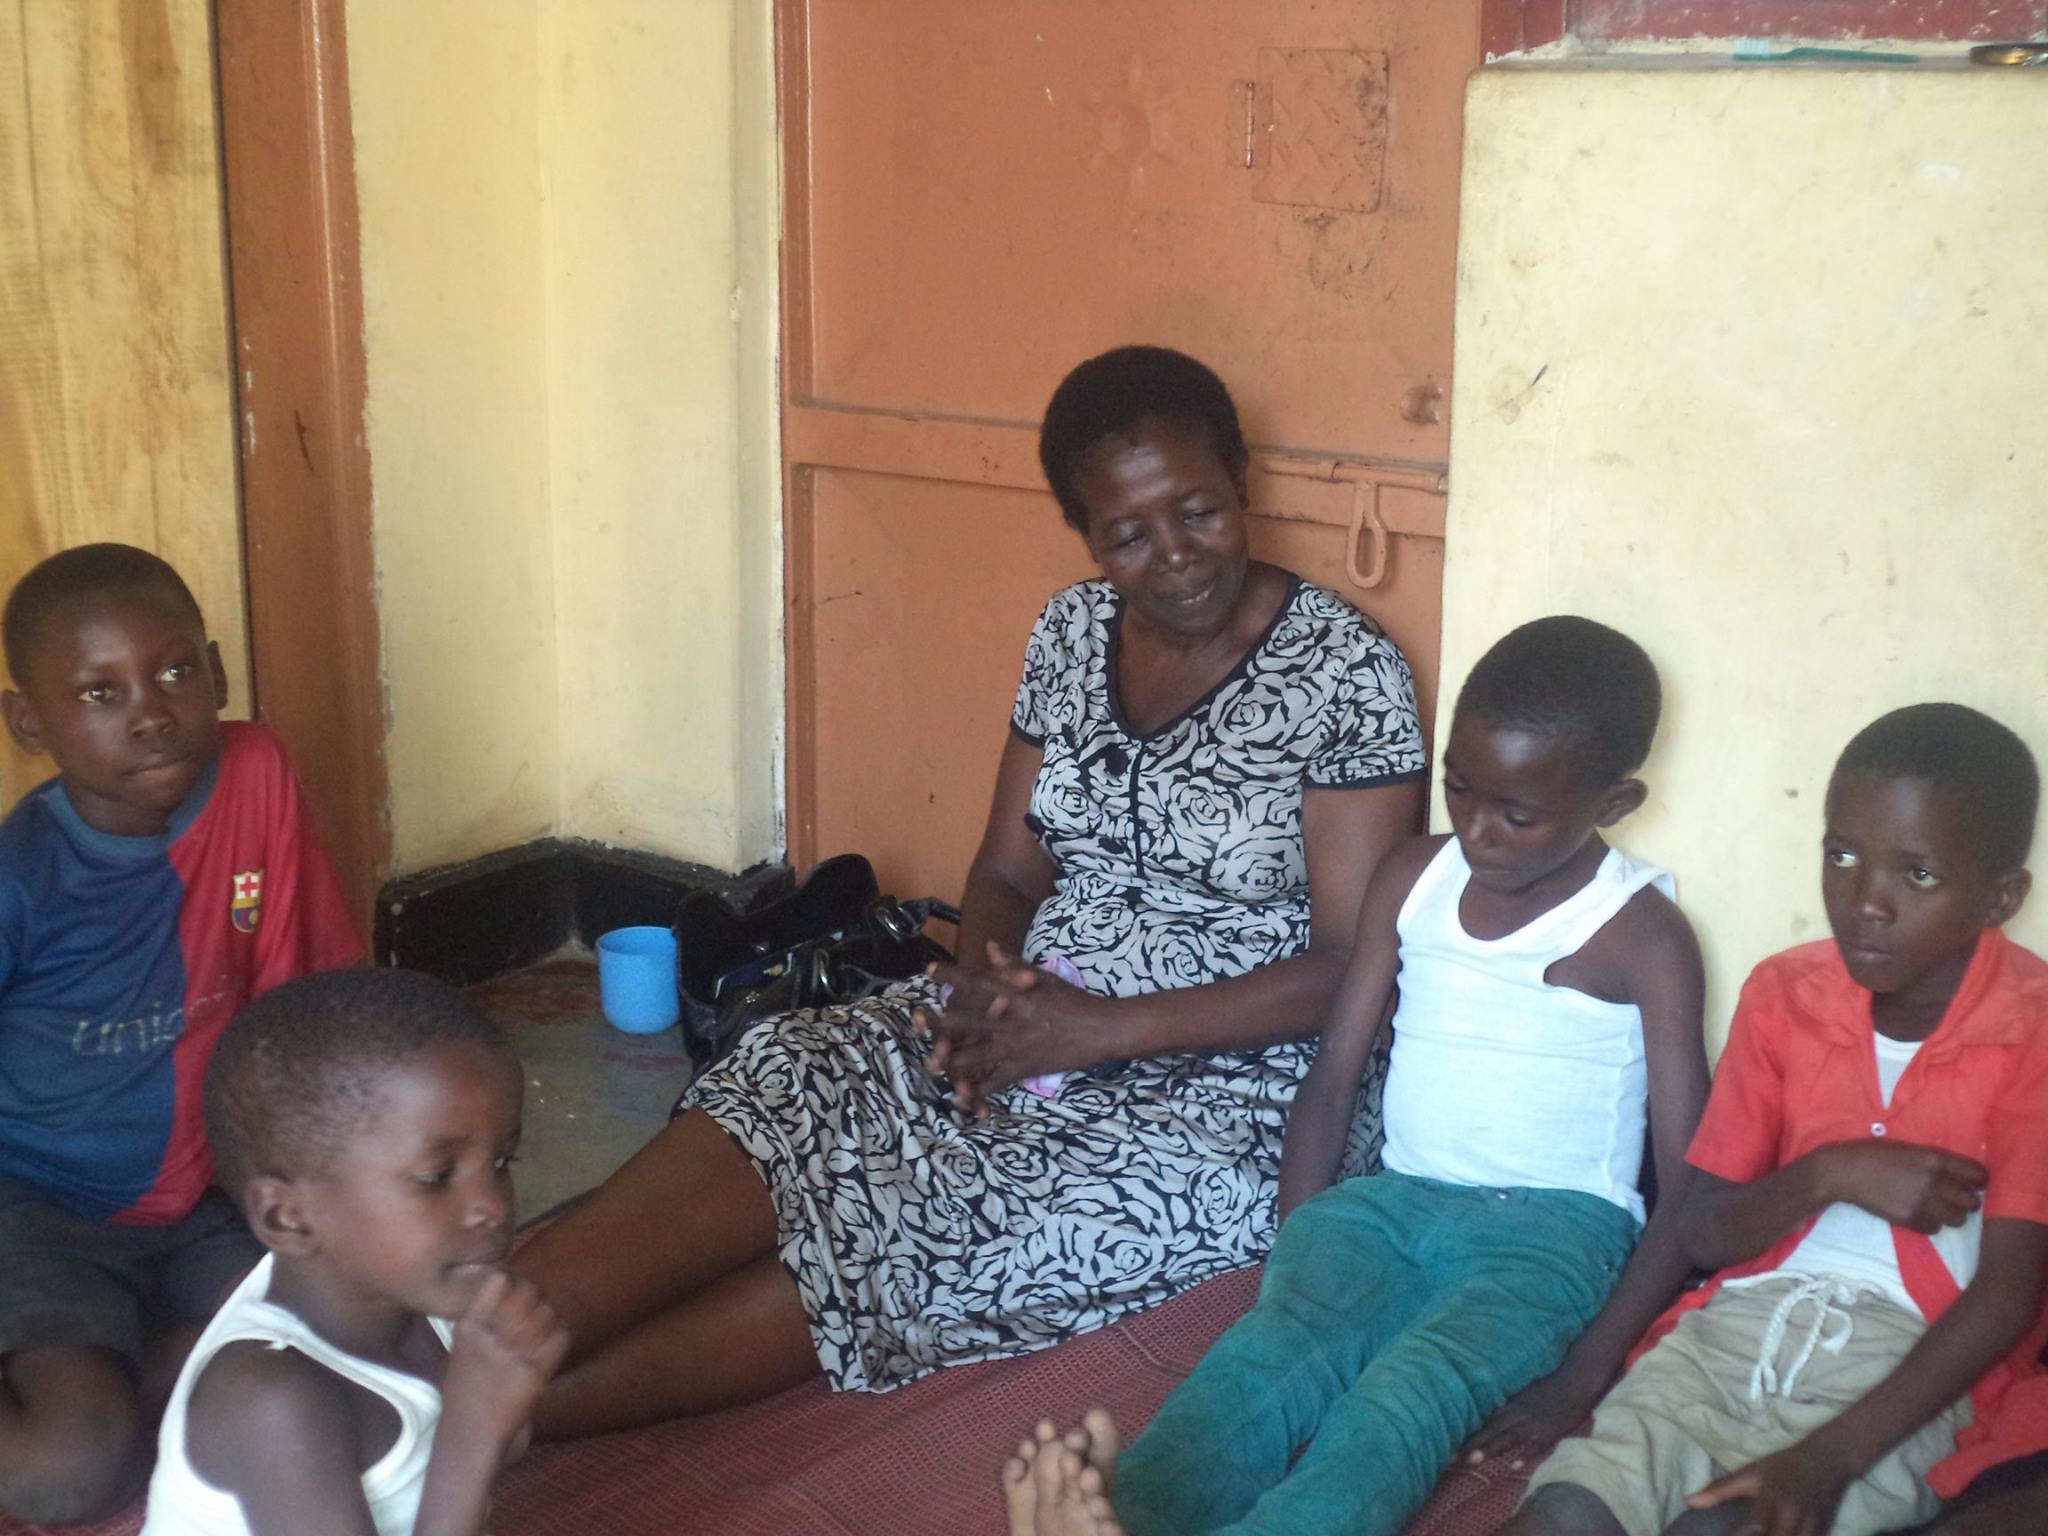 Martha and her children enjoying a snack and some down time at their home in Uganda.